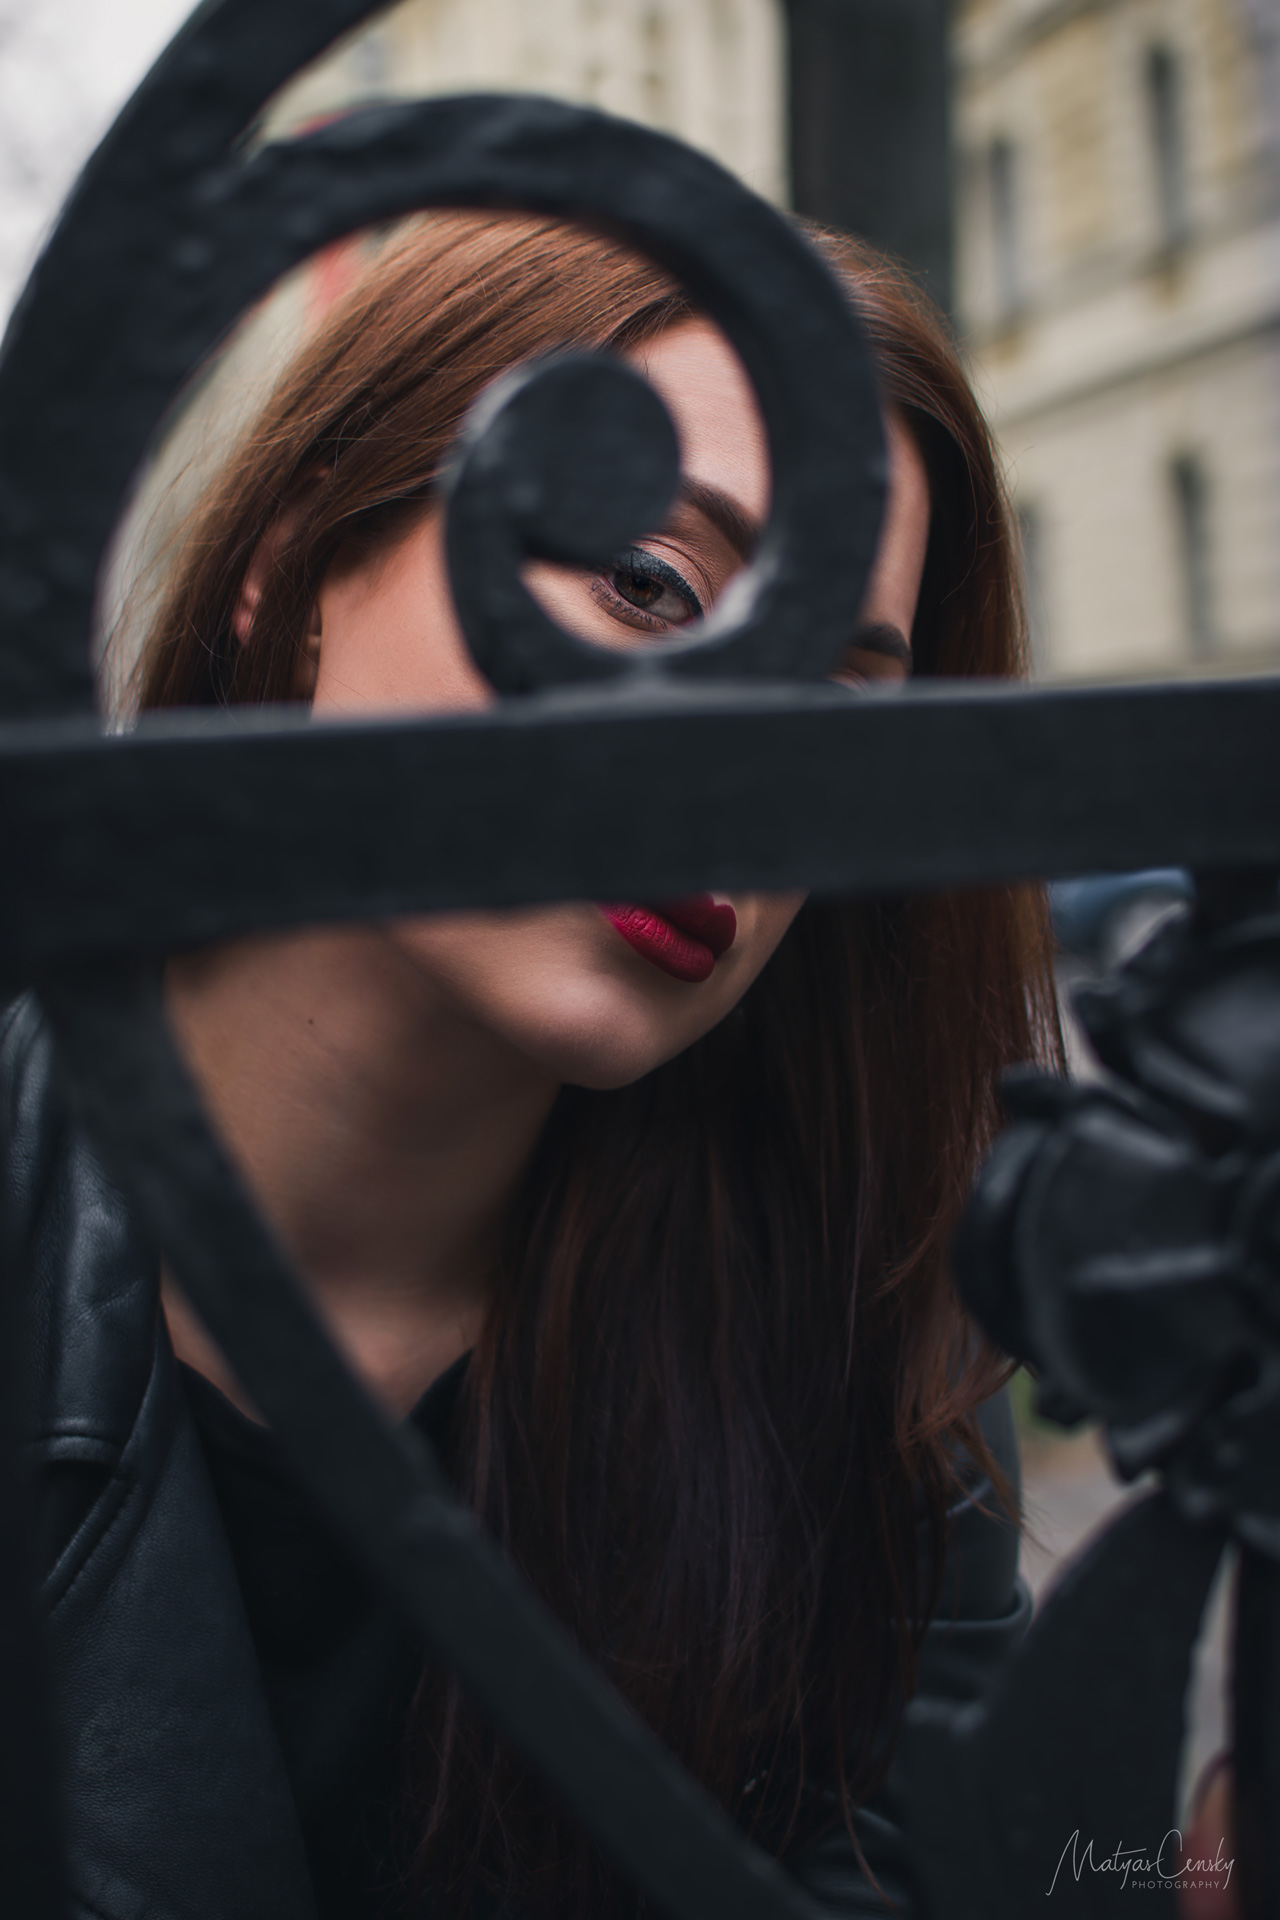 Close up photo of dark red hair women through old iron decorative fence copying the shape of golden ratio around her eye.